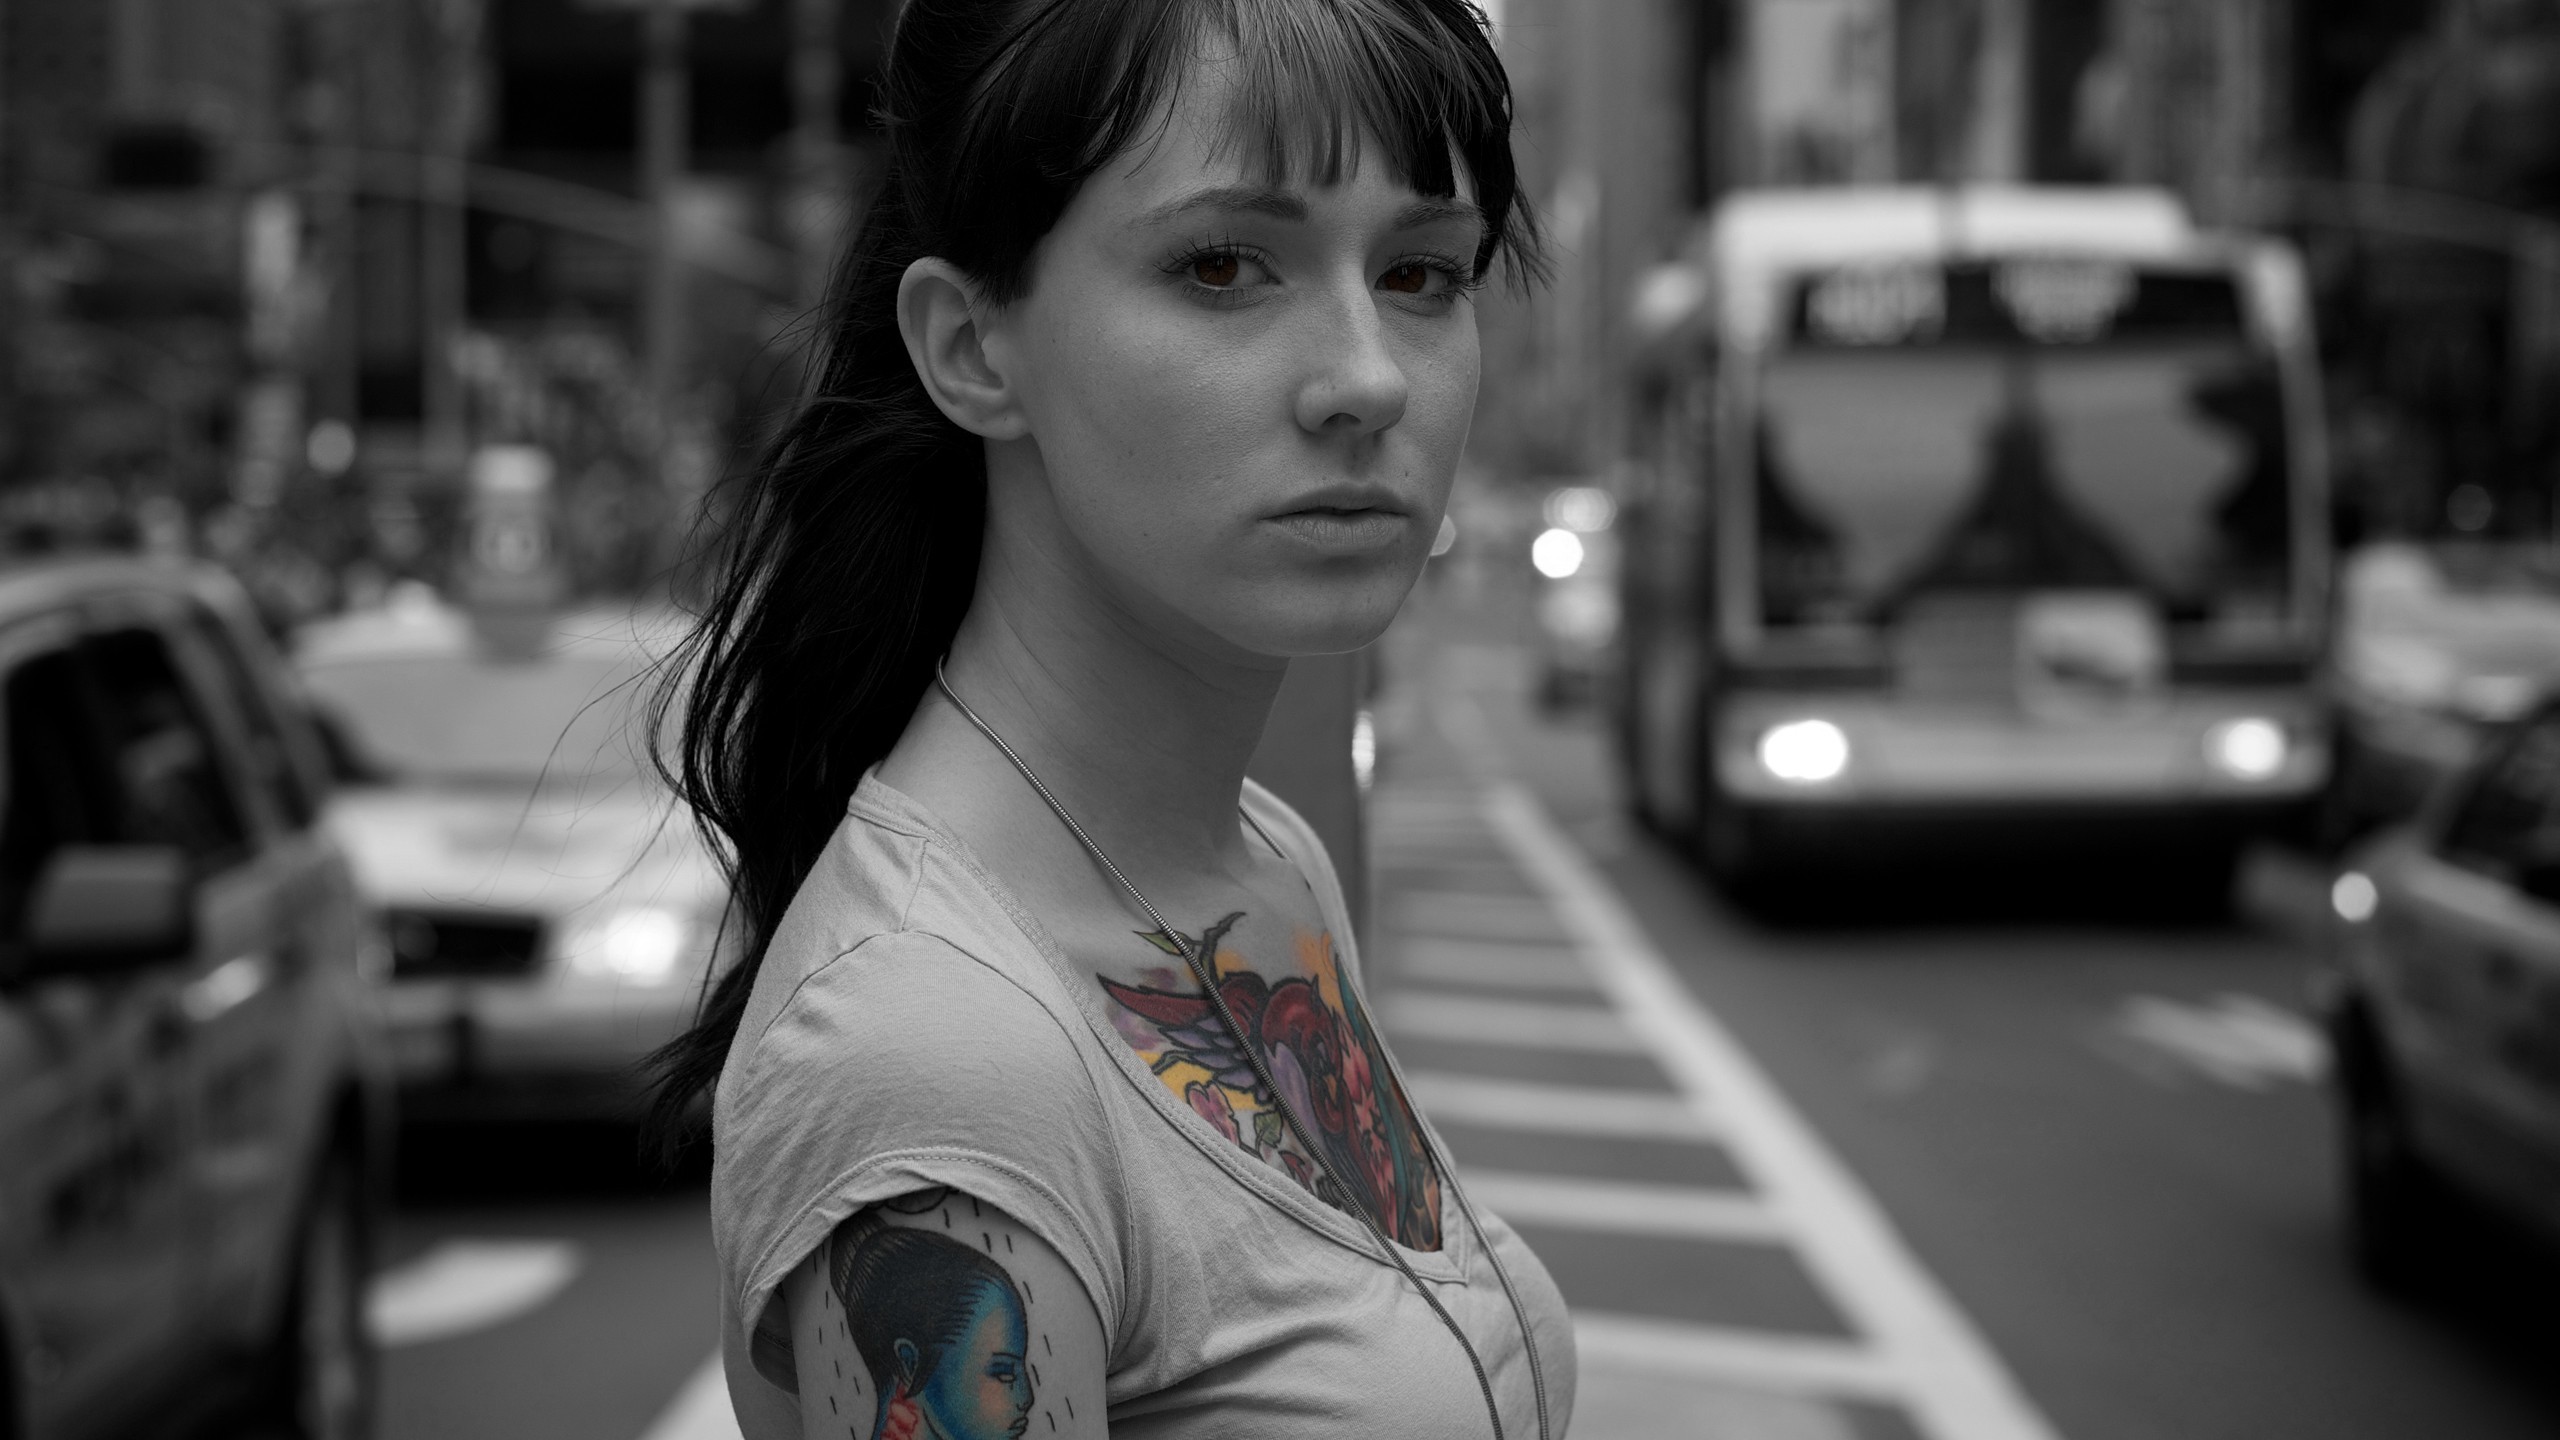 People 2560x1440 urban city selective coloring tattoo women model car T-shirt women outdoors traffic street buses inked girls portrait face looking at viewer